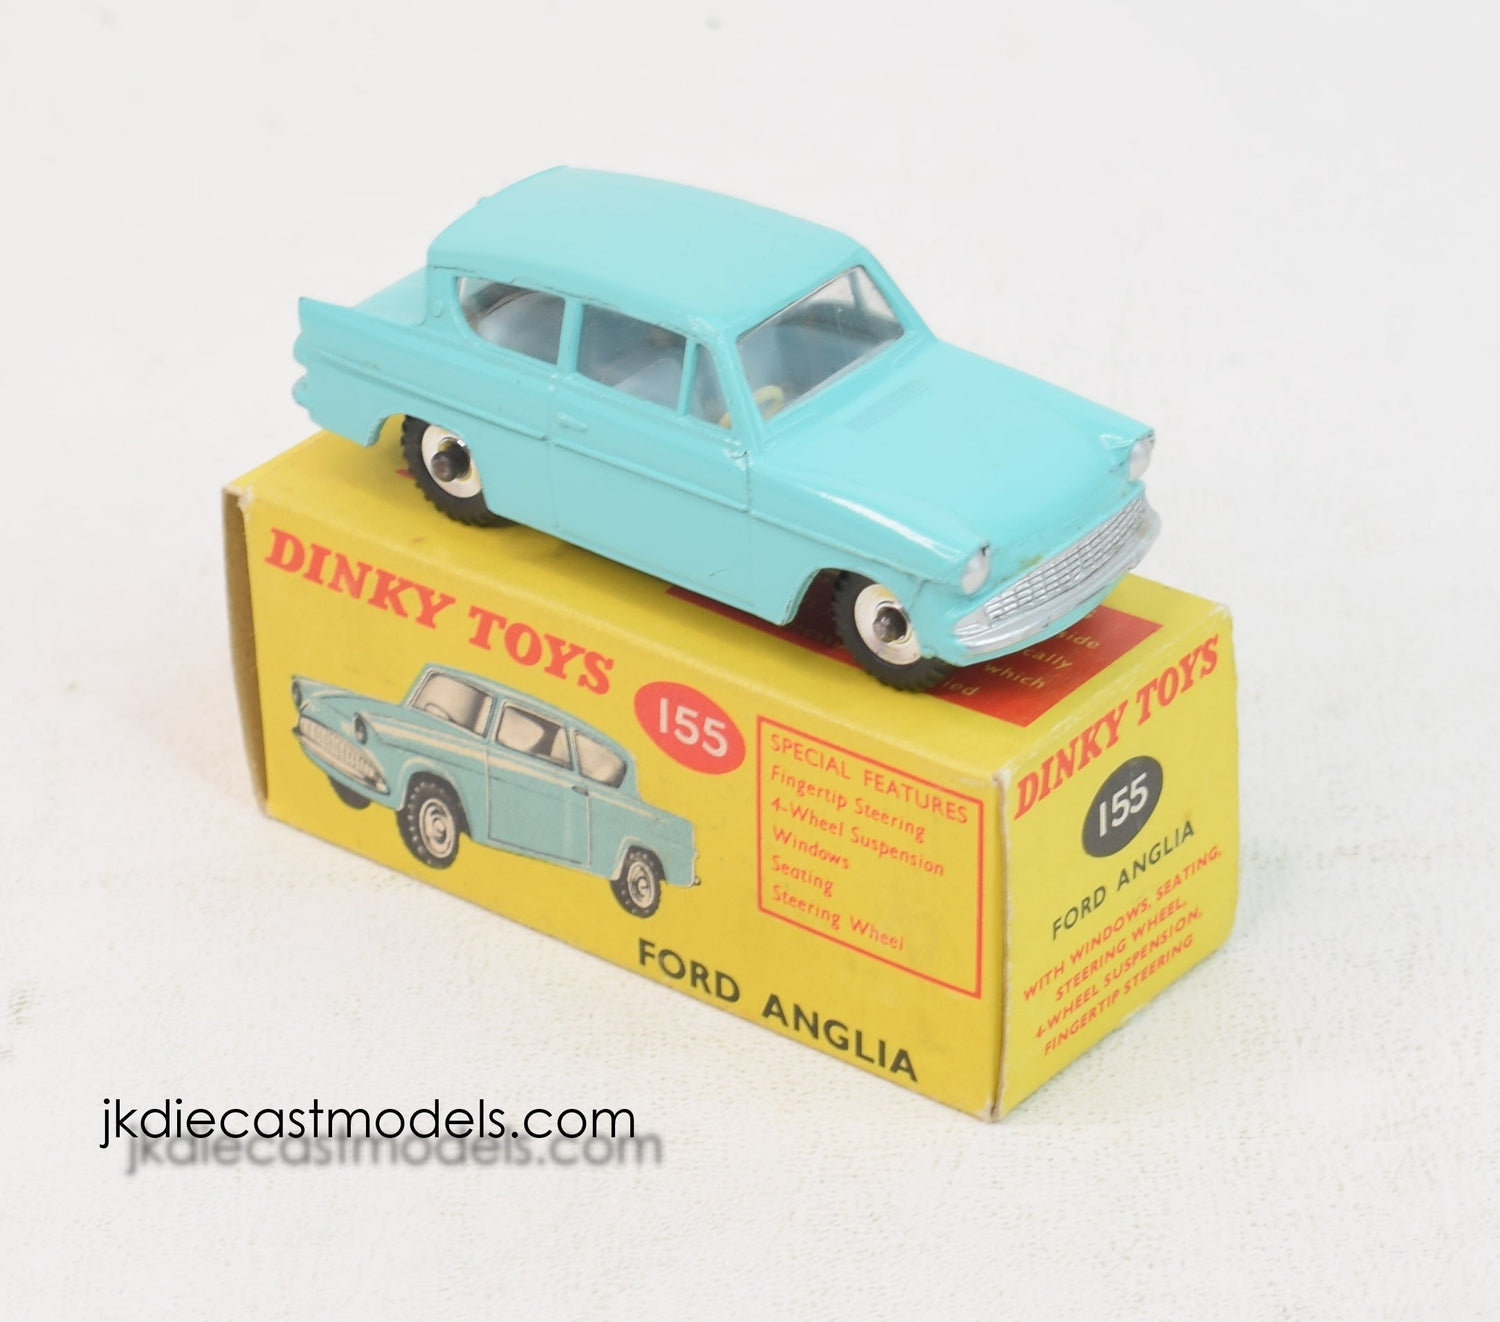 Dinky toys 155 Ford Anglia Virtually Mint/Boxed (Blue interior)